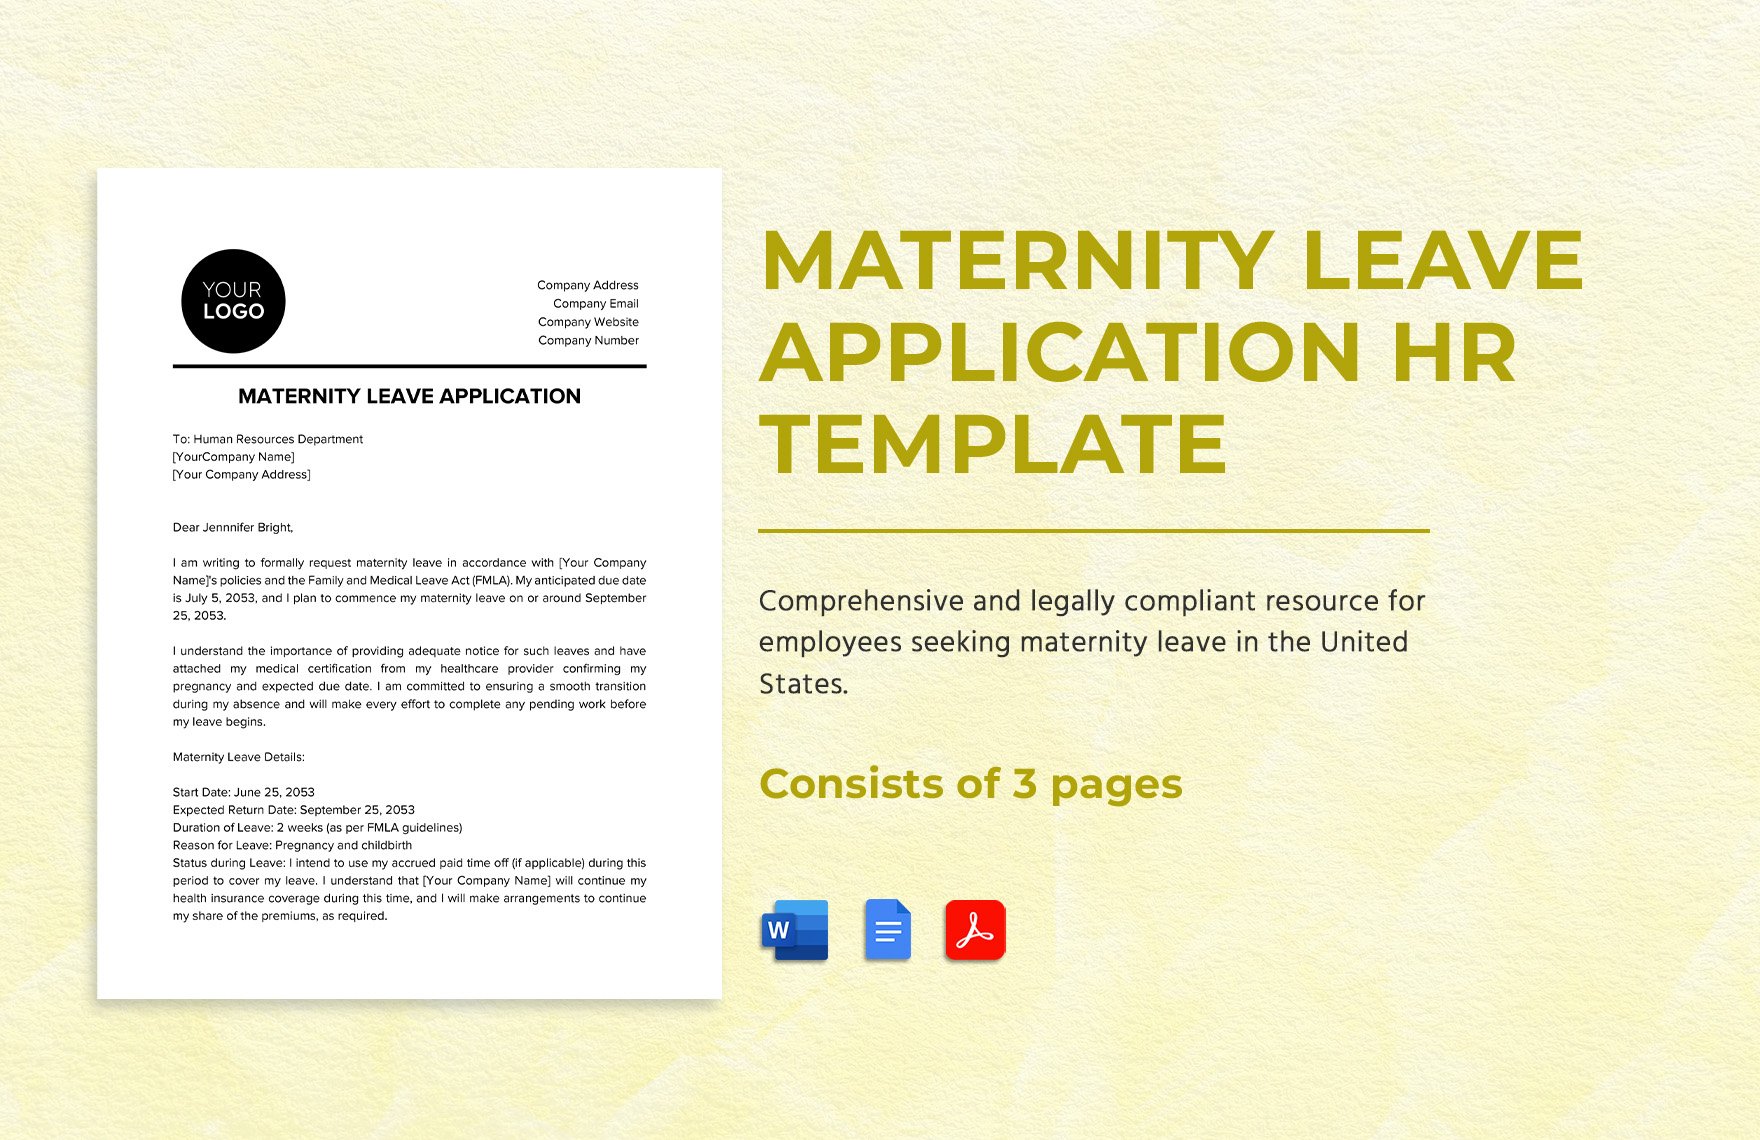 Maternity Leave Application HR Template